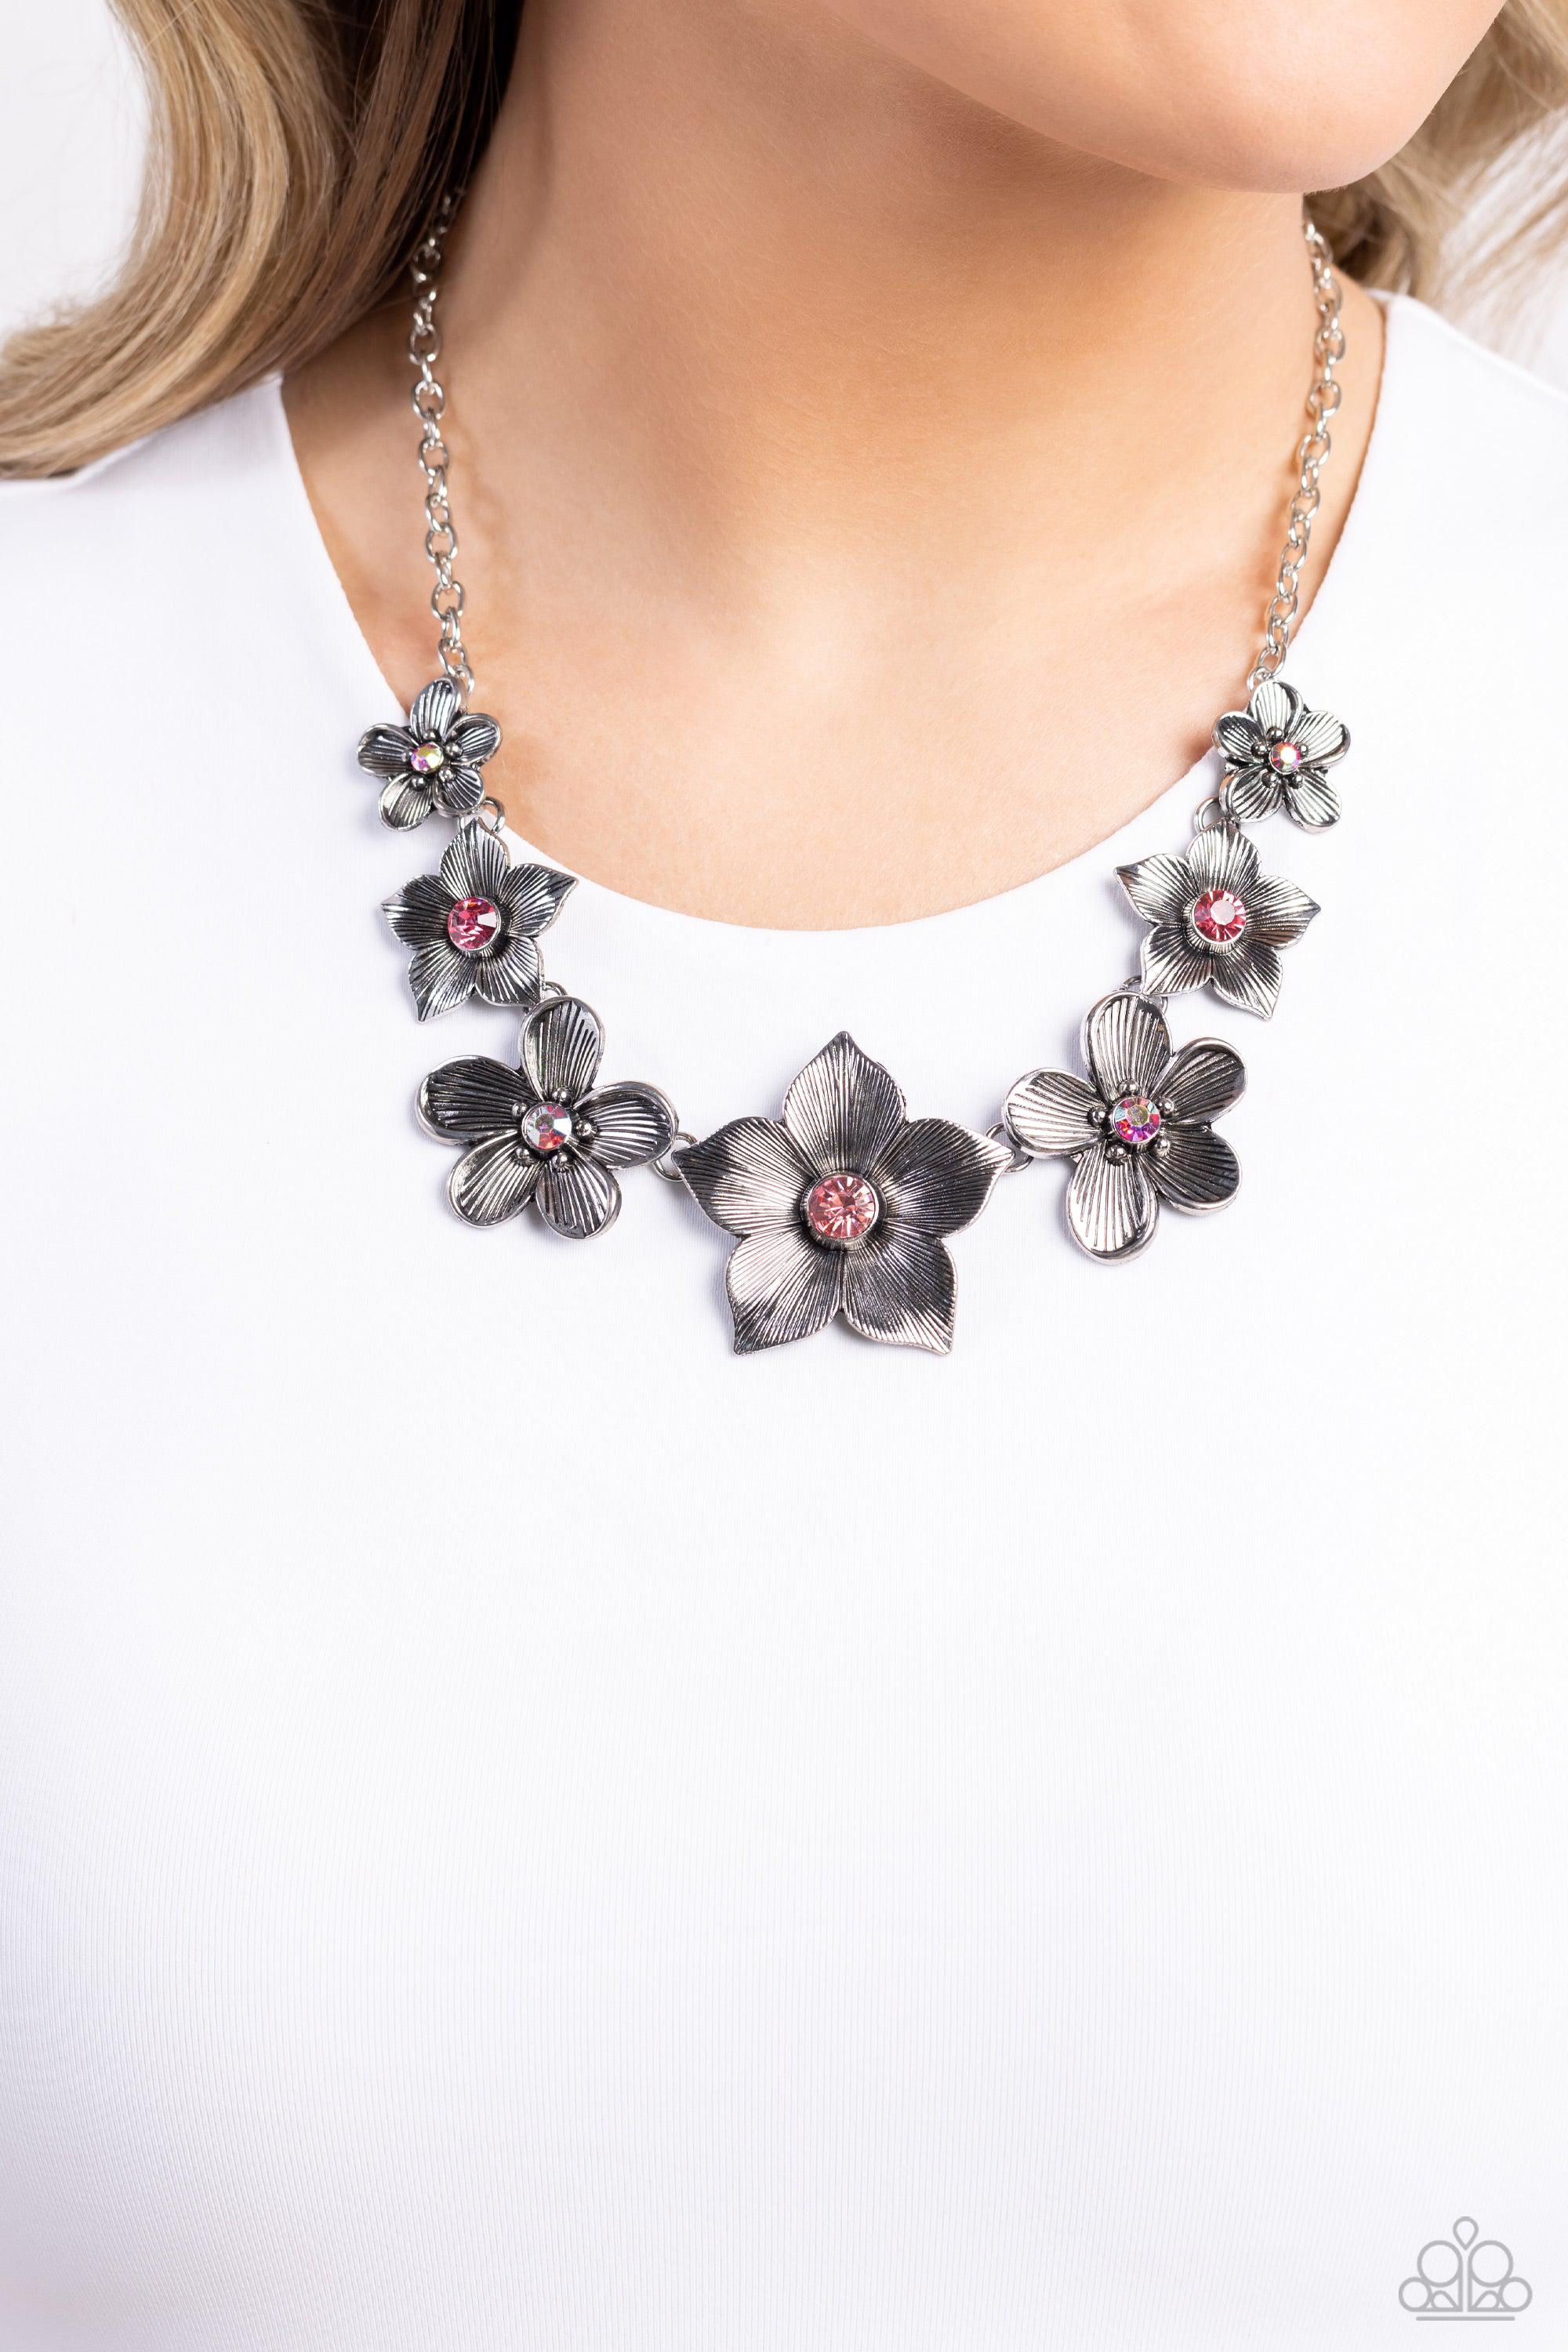 Free FLORAL Pink Necklace - Paparazzi Accessories- lightbox - CarasShop.com - $5 Jewelry by Cara Jewels